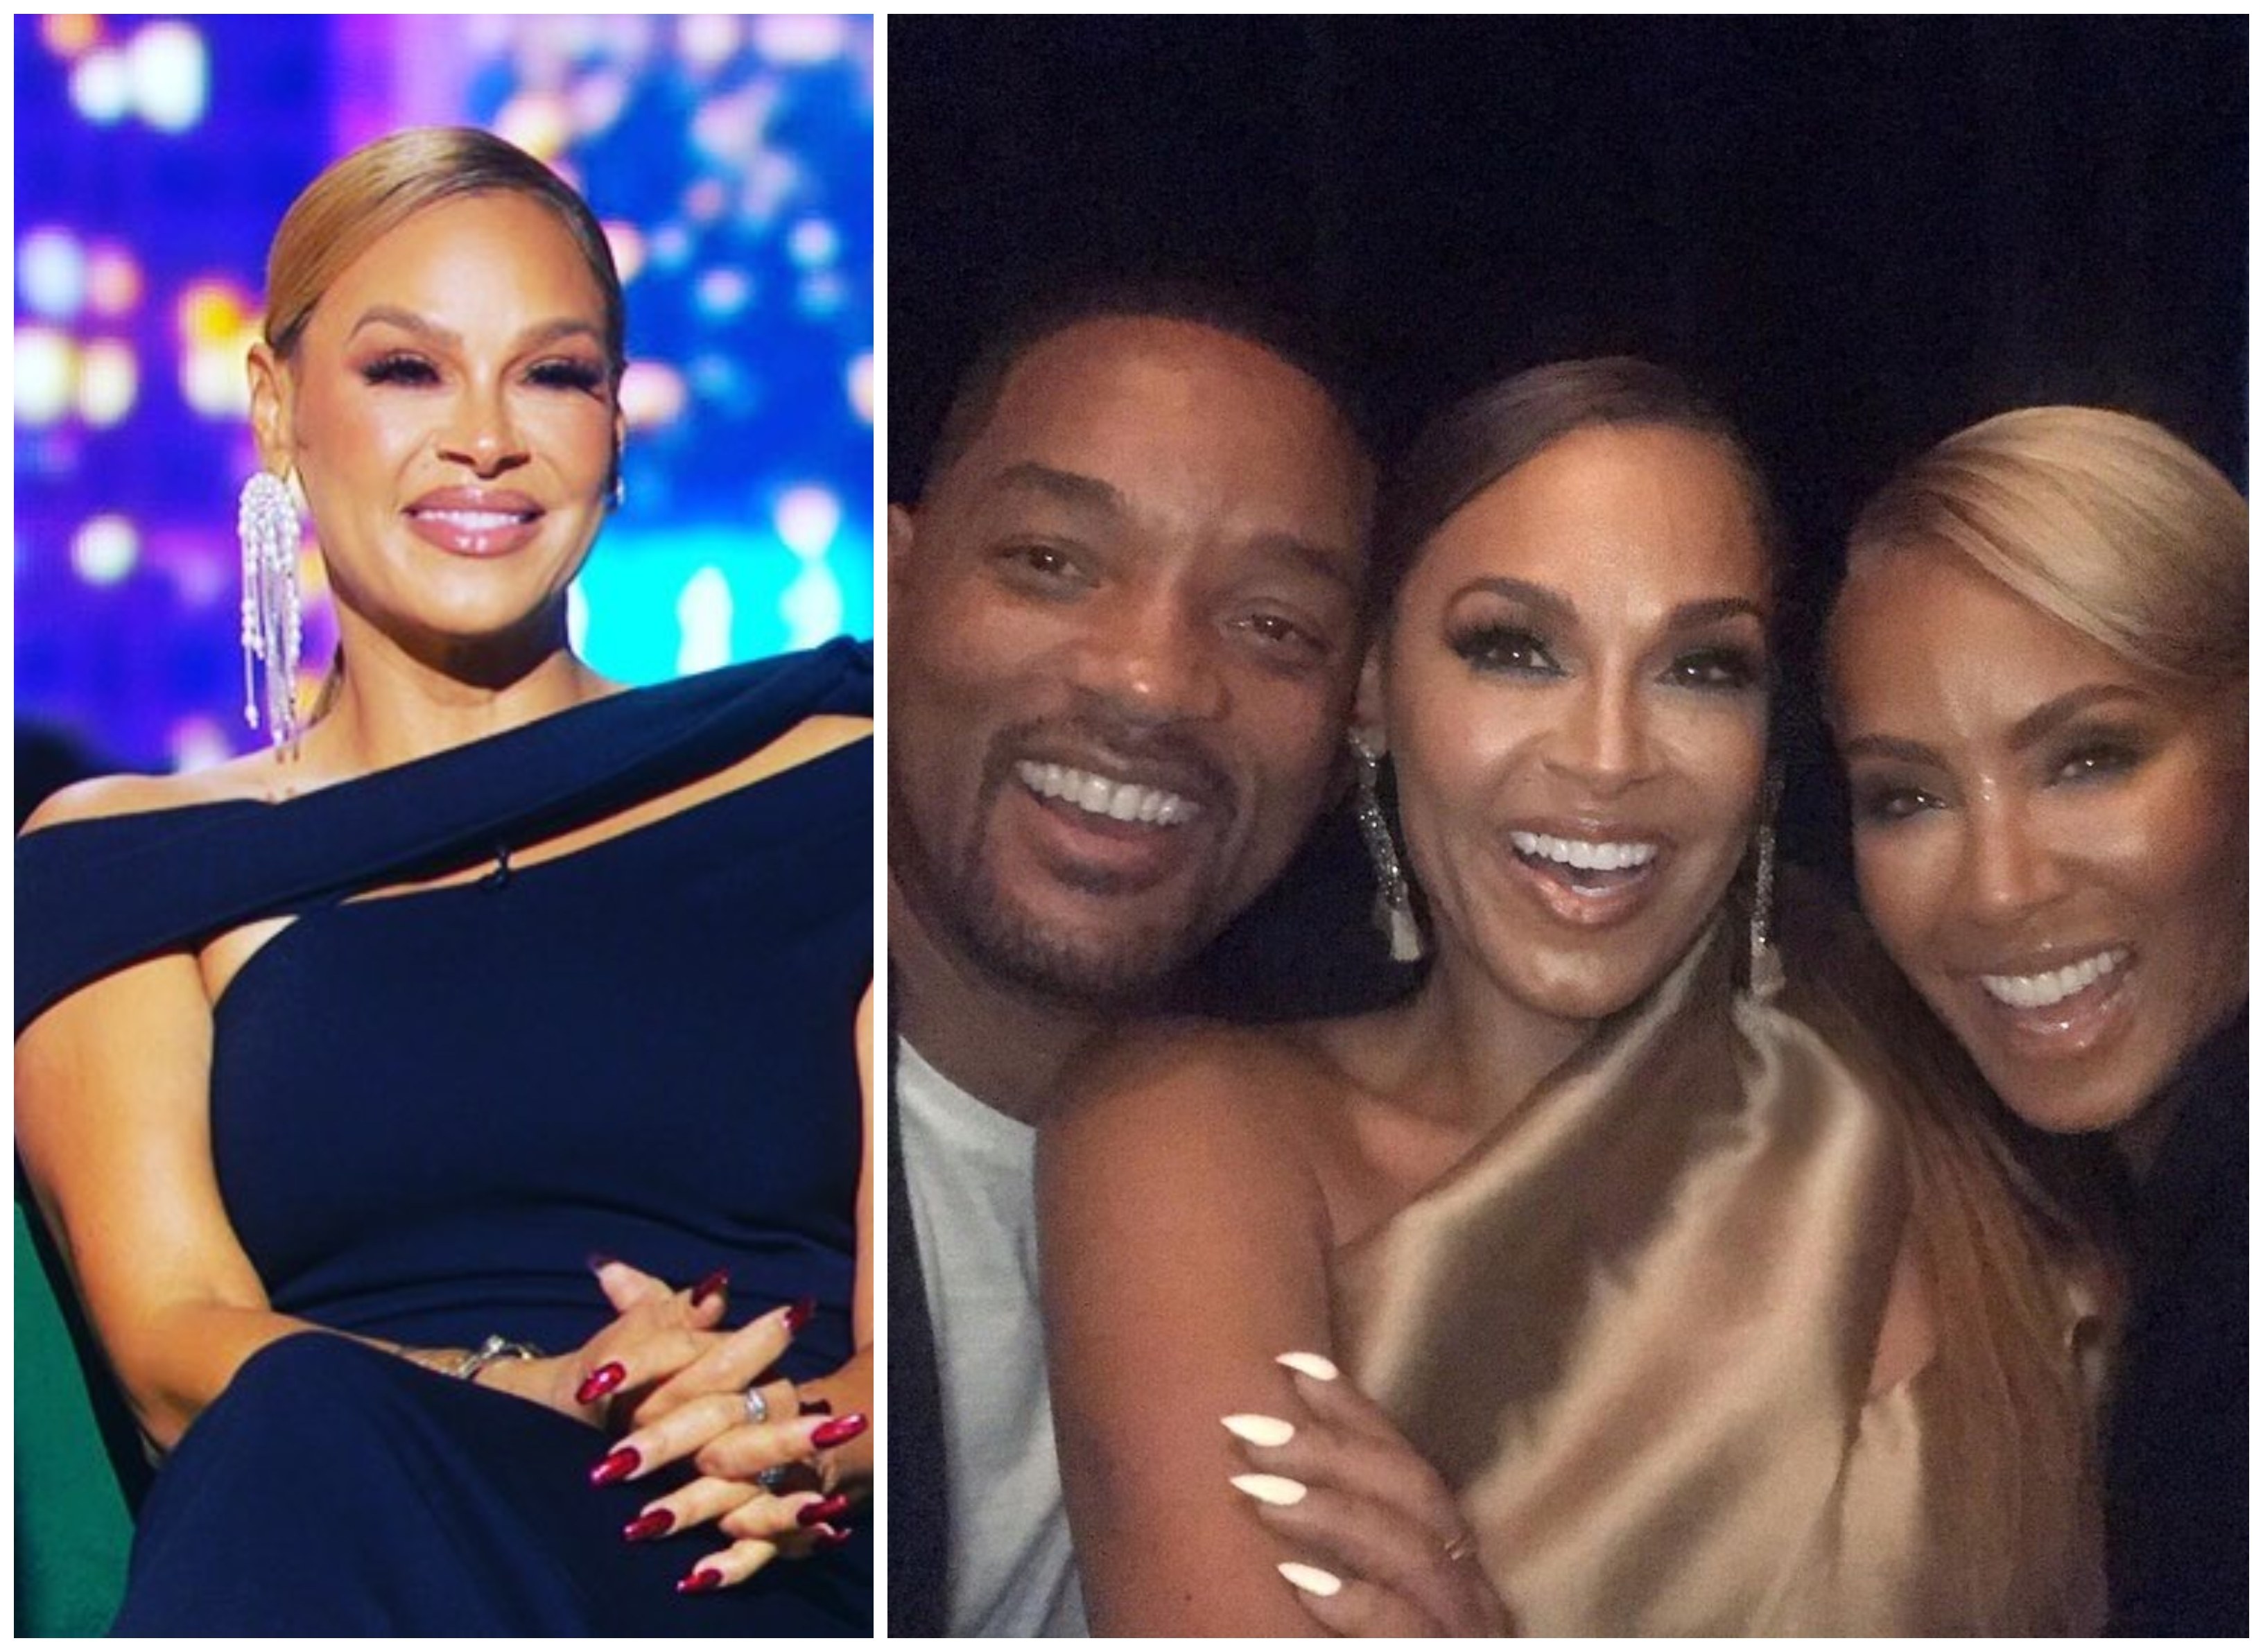 Sheree Zampino, the new cast member of RHOBH, shares a close bond with her ex Will Smith and his wife, Jada Pinkett. Photos: @shereezampino/Instagram